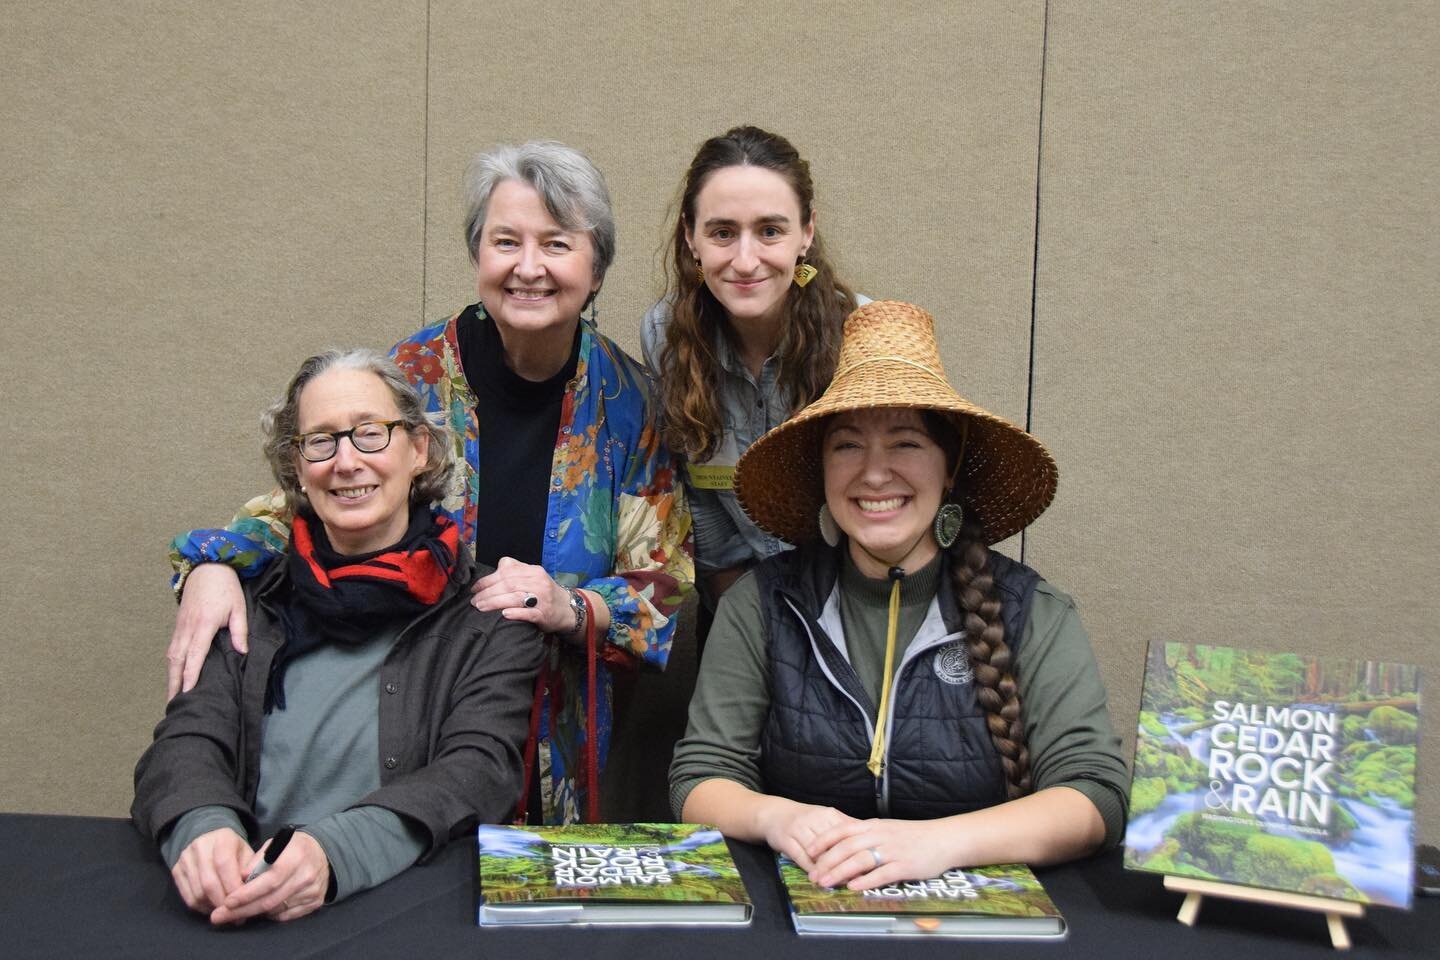 Thank you to everyone who came out to our event in collaboration with @mountaineersorg last night to celebrate the incredible Olympic Peninsula through storytelling from Braided River&rsquo;s newest book SALMON, CEDAR, ROCK and RAIN: WASHINGTON&rsquo